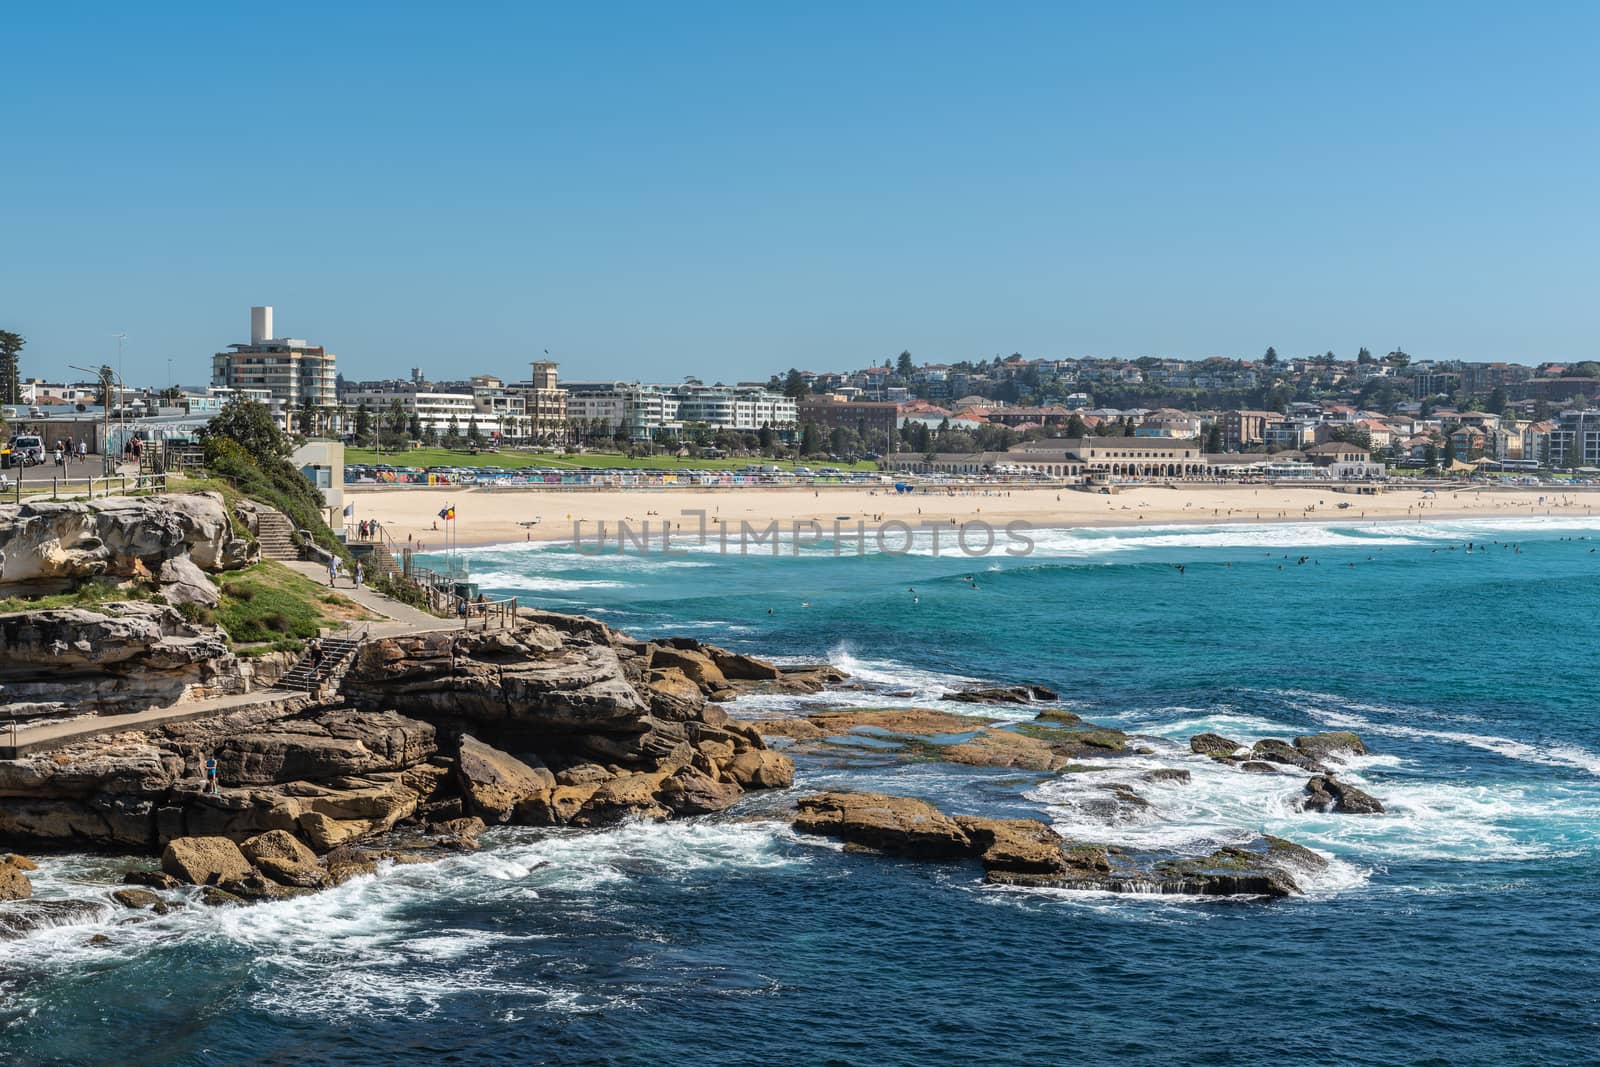 Sydney, Australia - February 11, 2019:  Sandy Bondi beach with gray rocky Mackenzies Point in front. Horizon is band of buildings of Bondi. Blue water and blue sky.